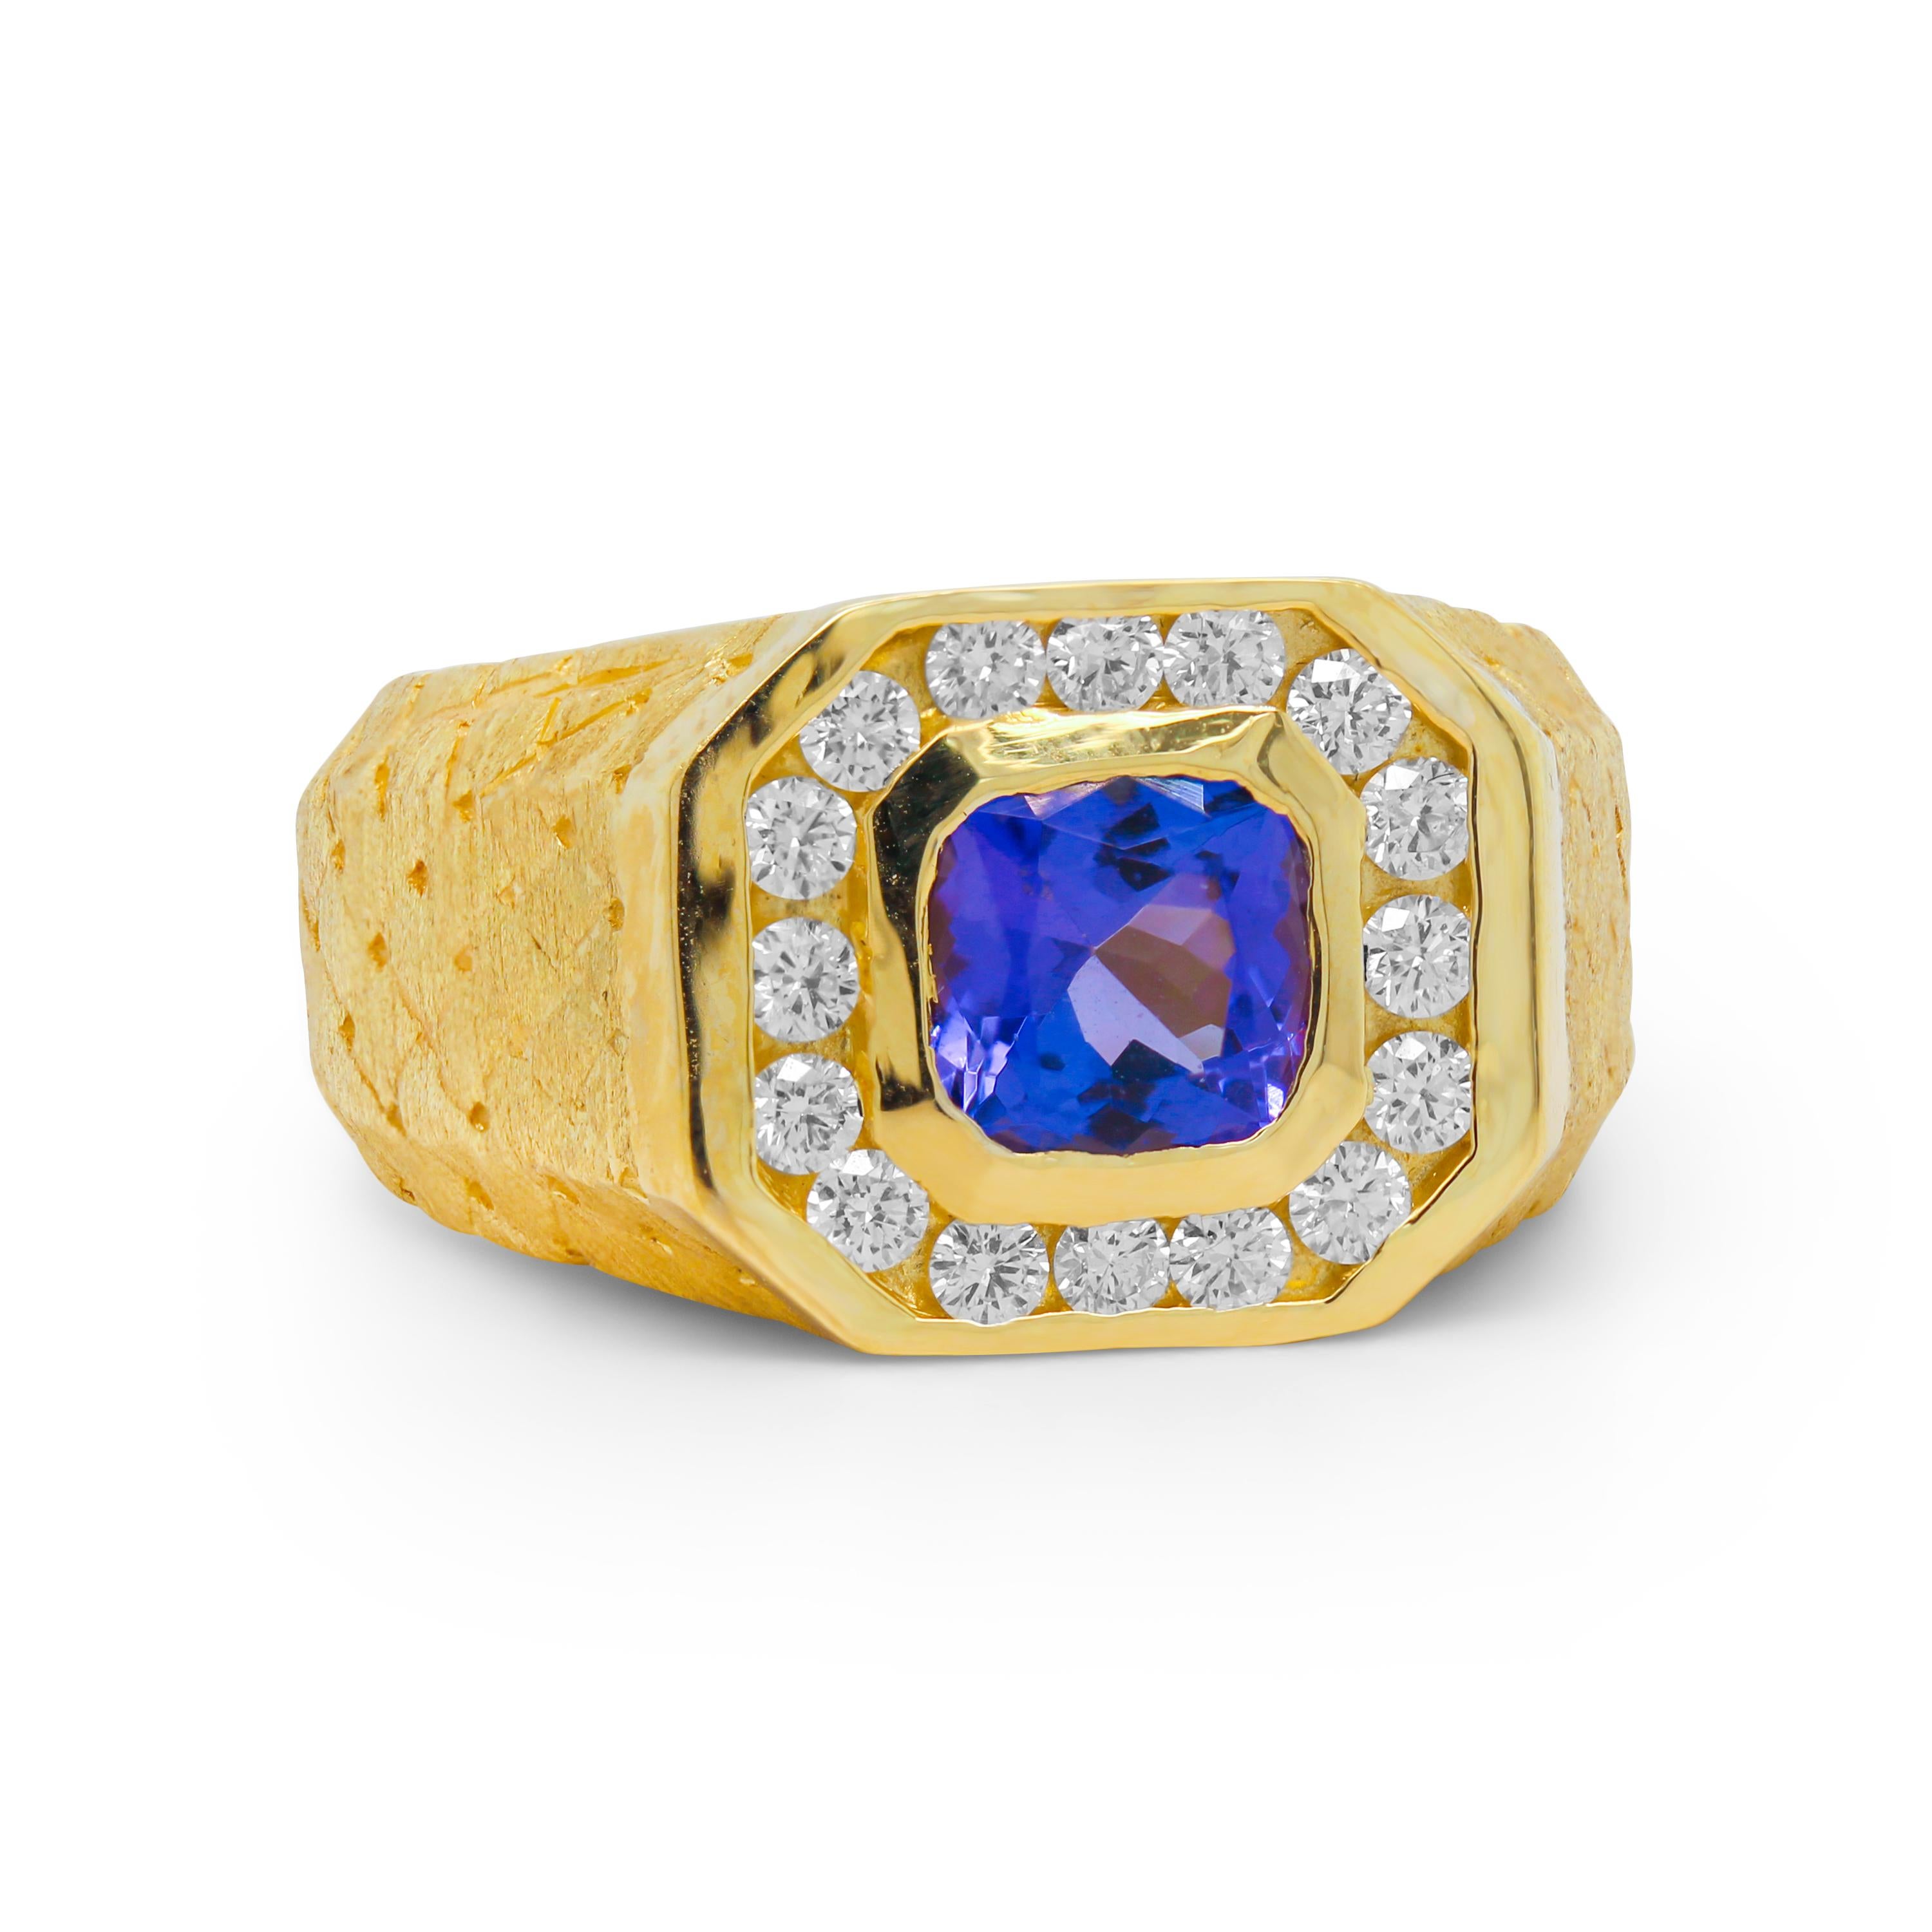 Stamnbolian 18K Gold Diamond Princess Cut Tanzanite Satin Finish Mens Ring

This mens ring from Stambolian features textured, satin gold finish on both sides and the center is Tanzanite surrounded by diamonds

0.56 carat G color, VS clarity